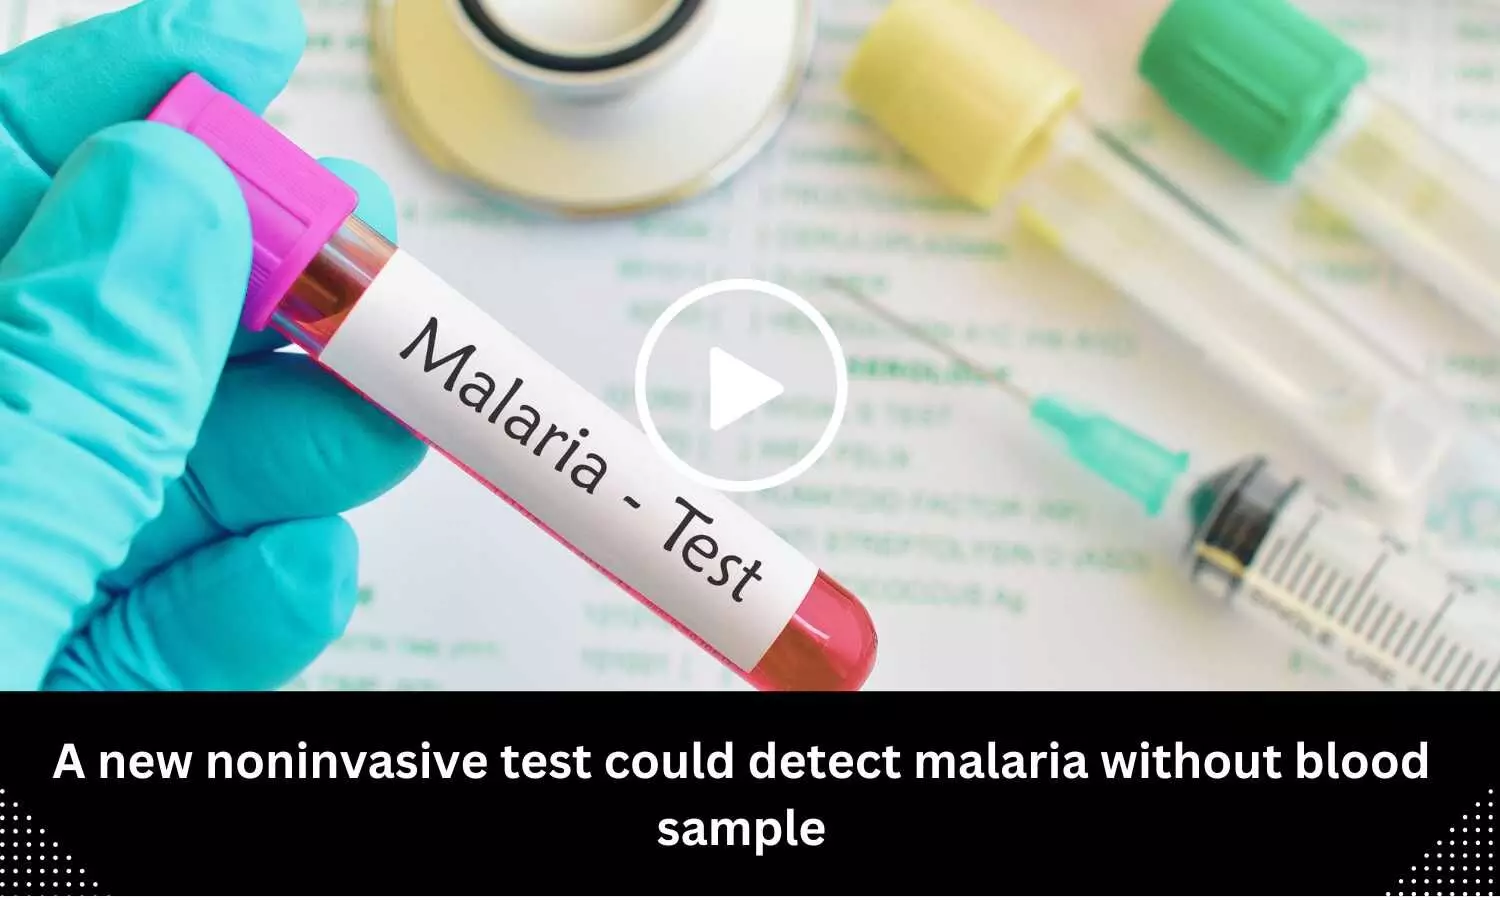 A new noninvasive test could detect malaria without blood sample